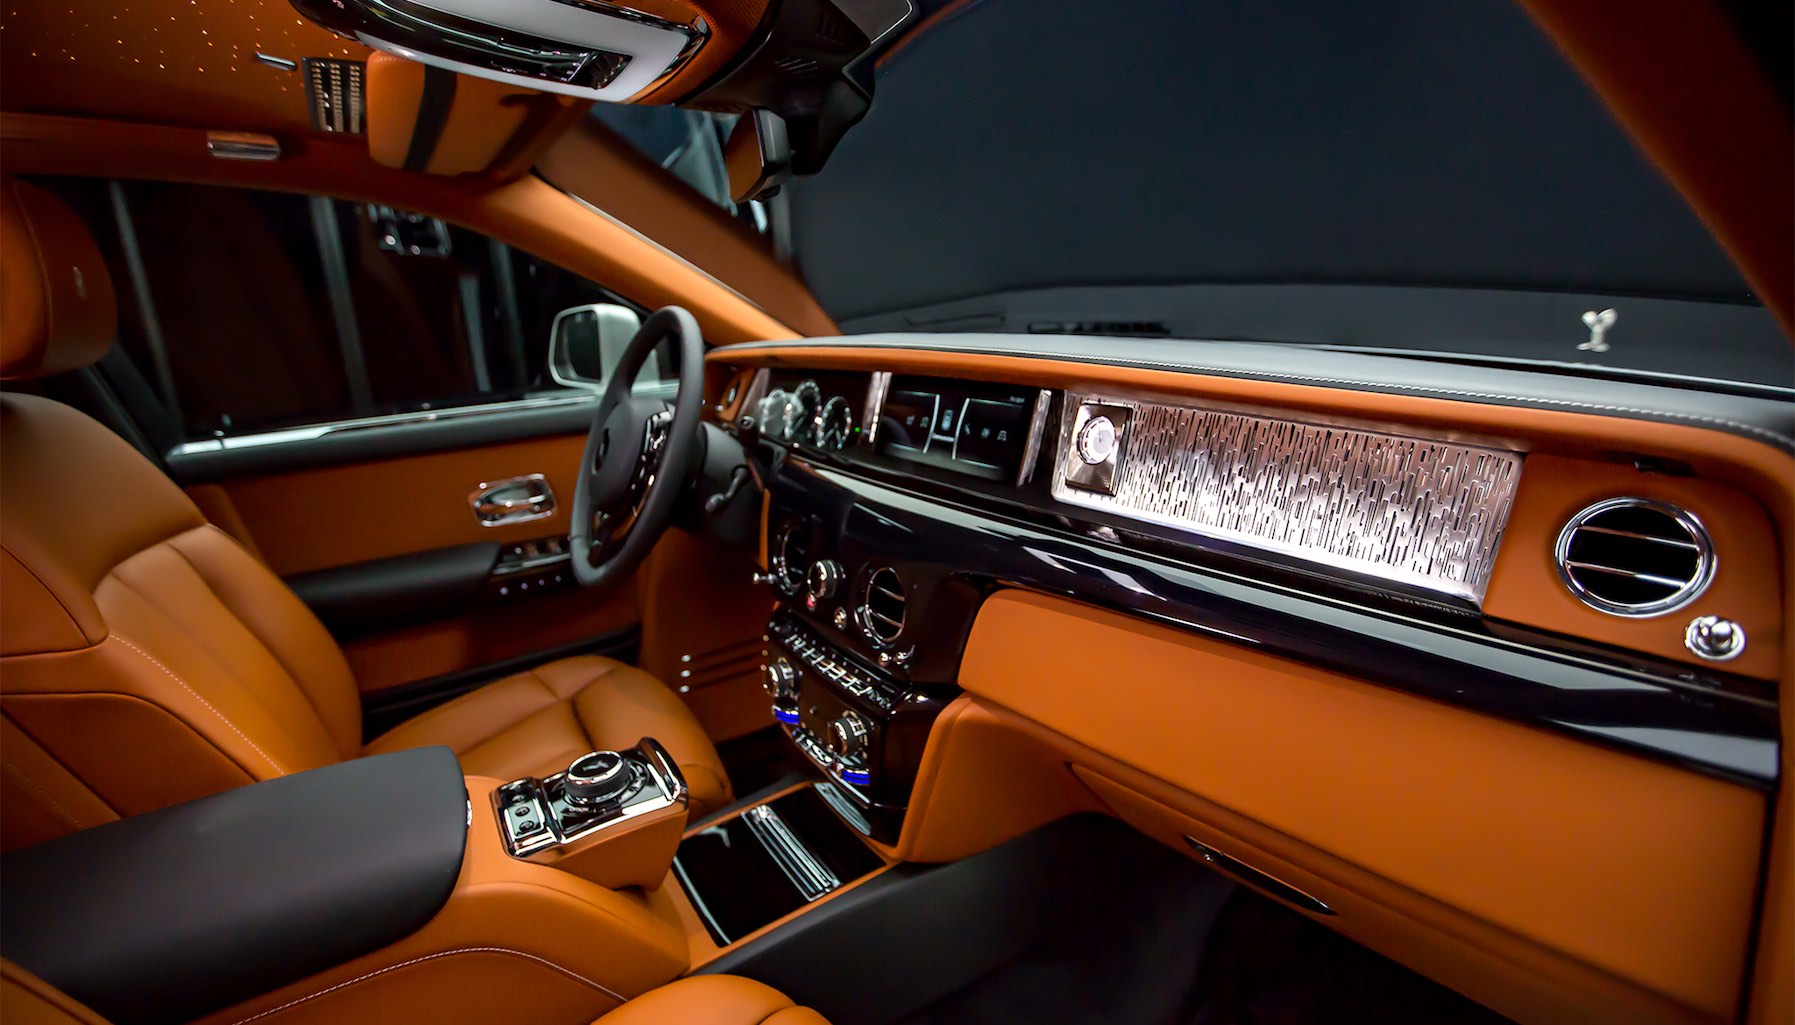 2018 RollsRoyce Phantom review ratings specs photos price and more   CNET